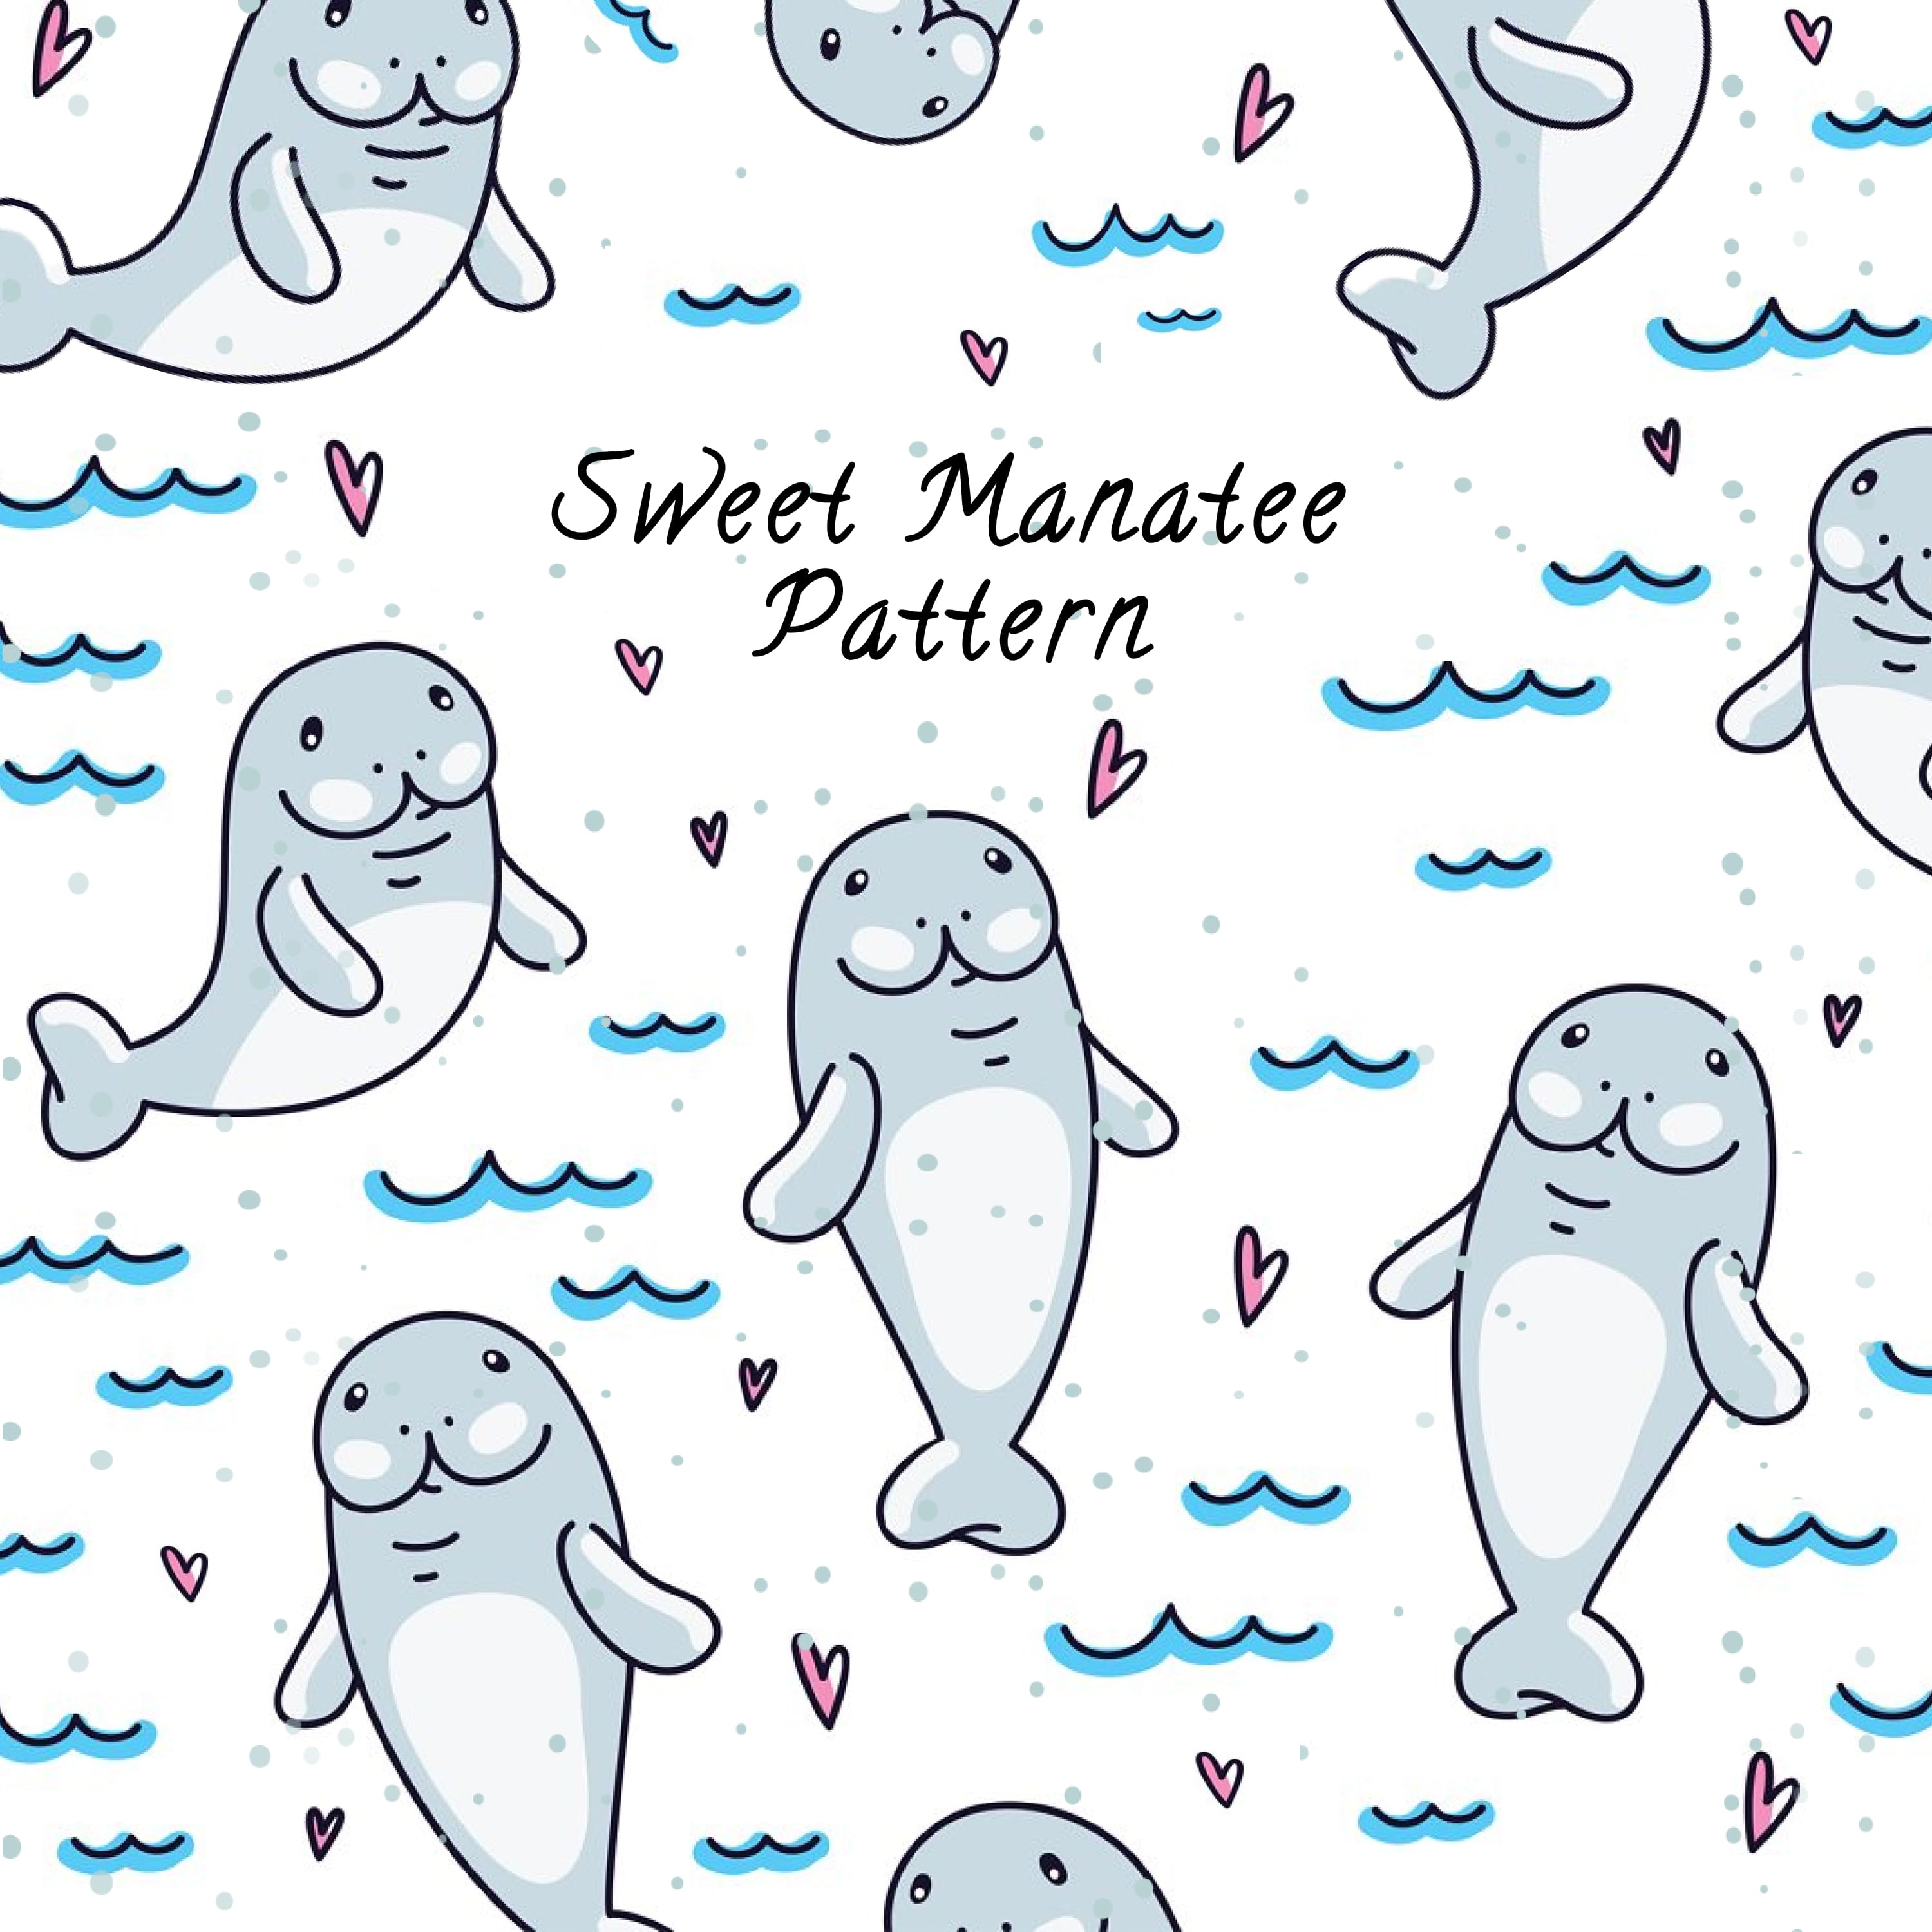 Sweet Manatee Pattern cover.